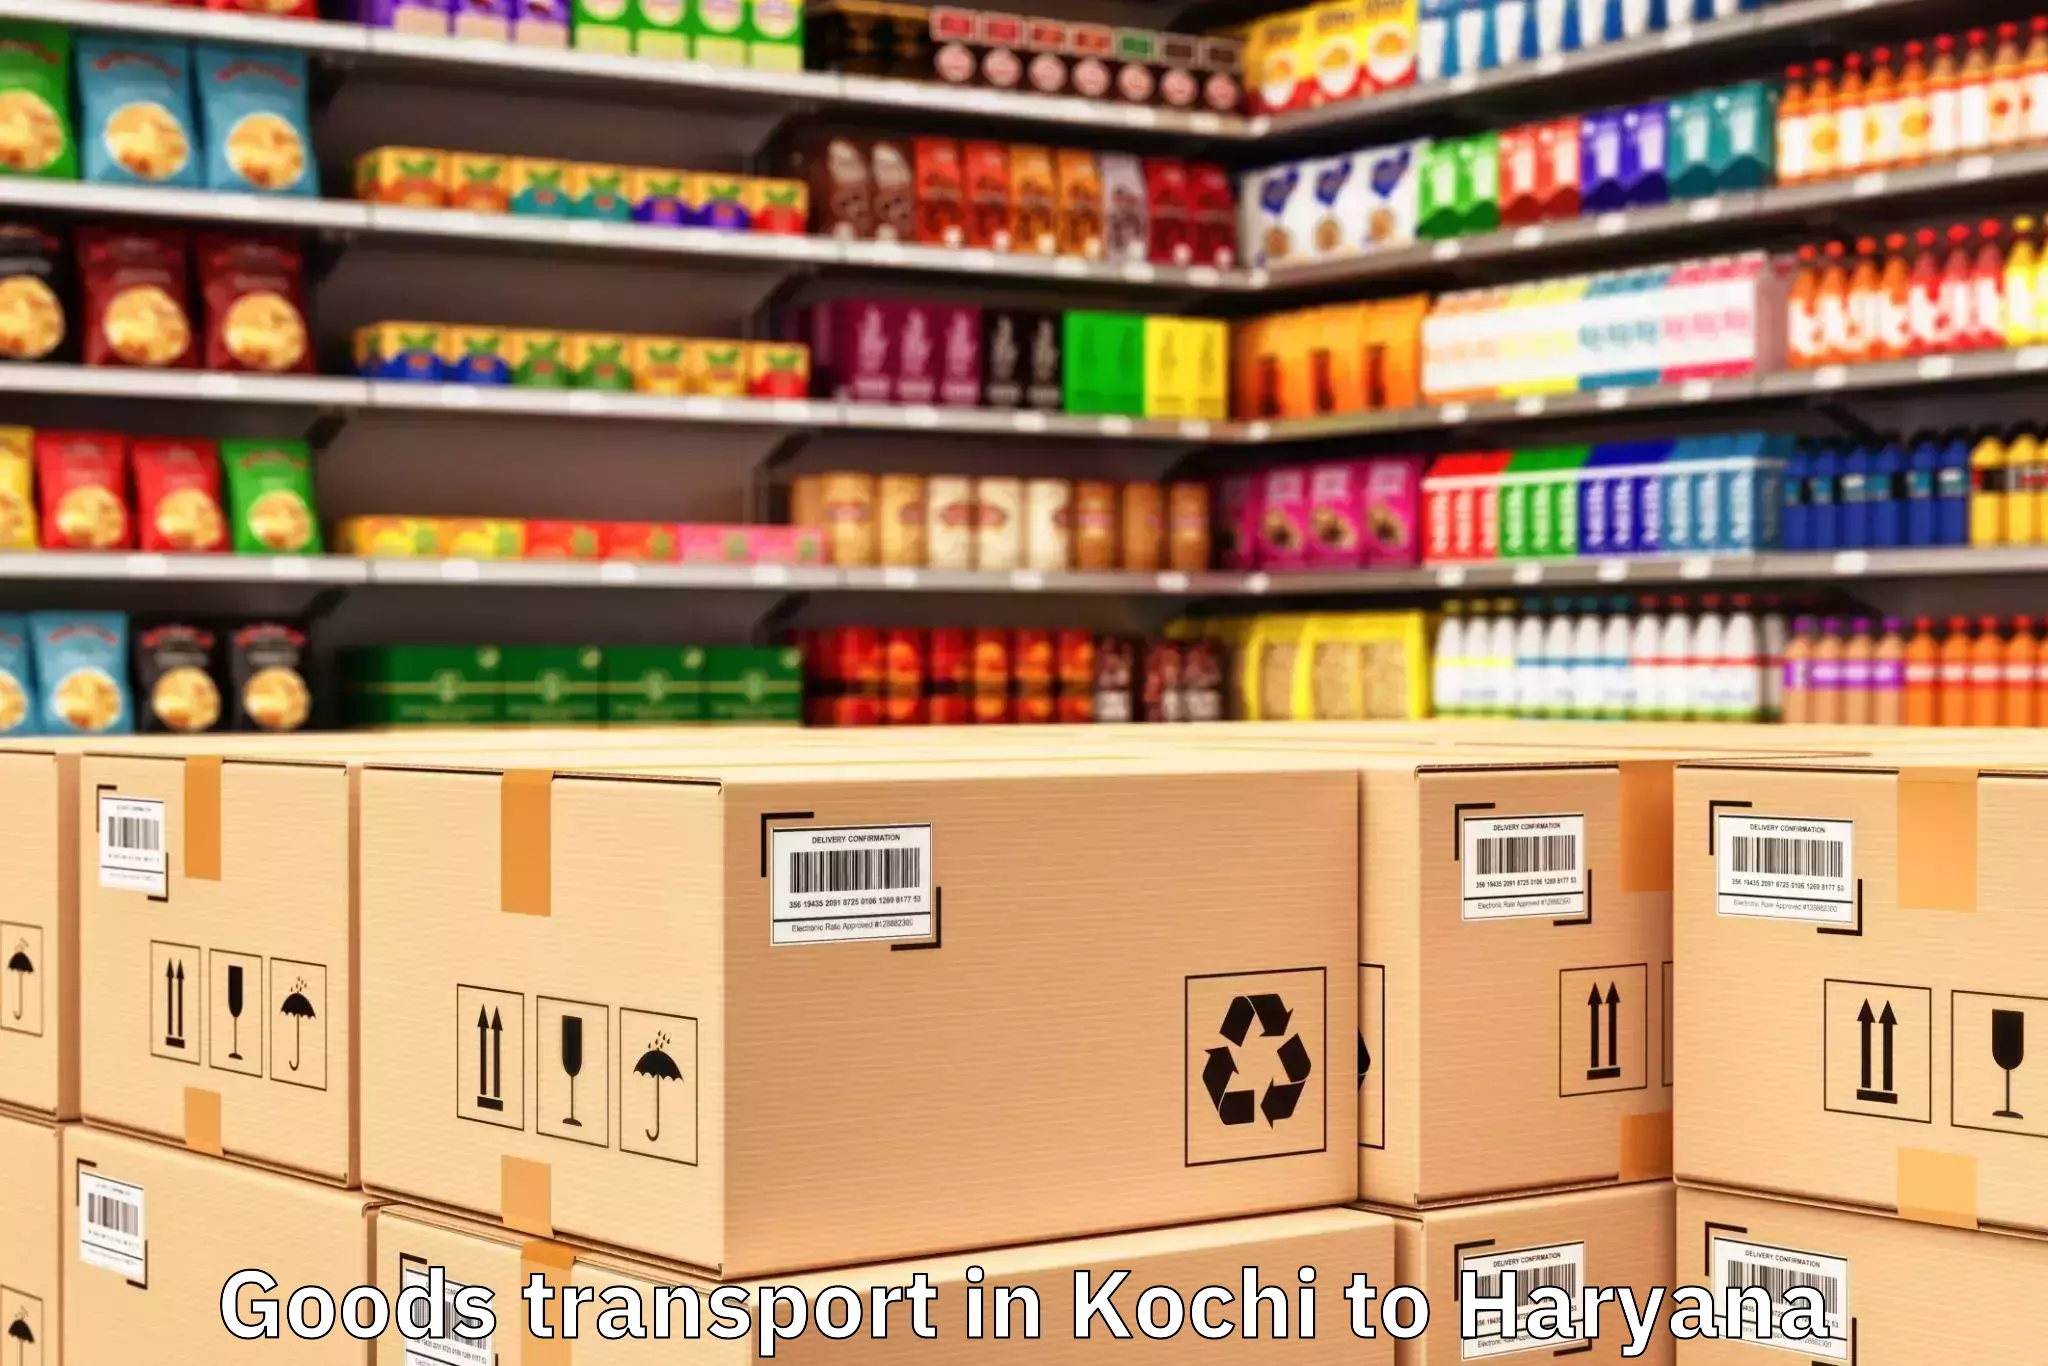 Top Kochi to Ansal Highway Plaza Mall Goods Transport Available